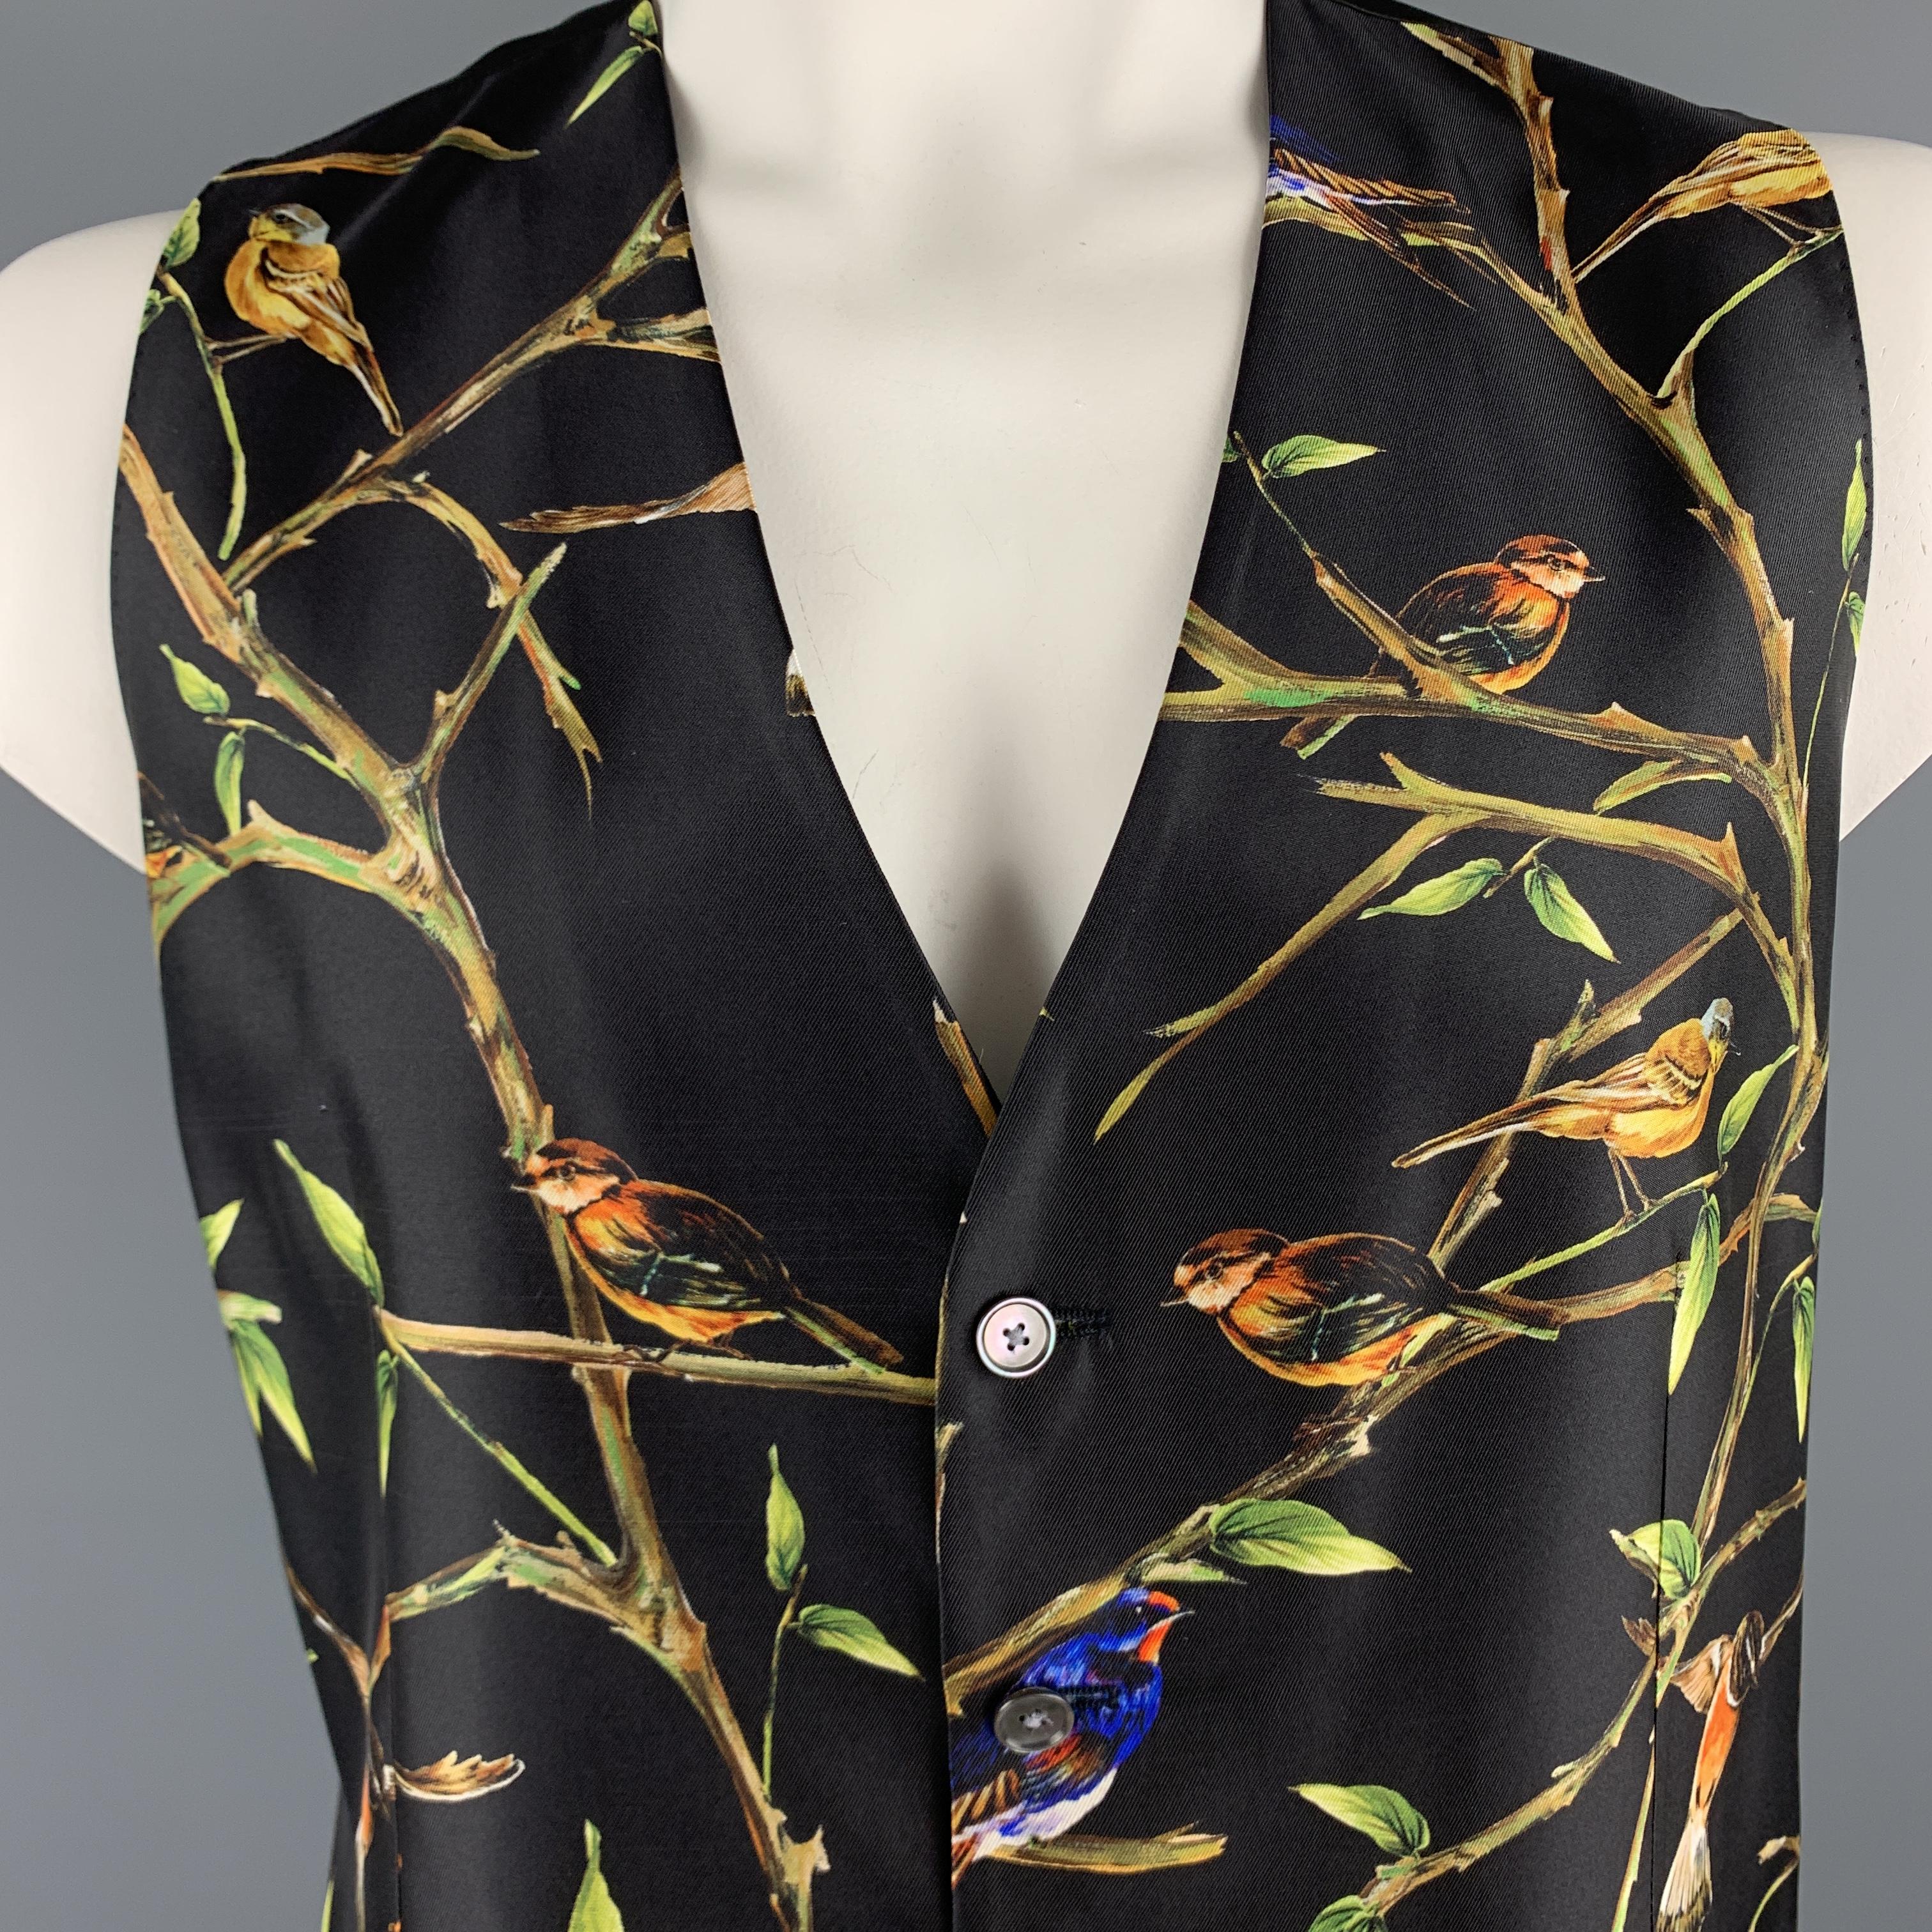 DOLCE & GABBANA vest comes in black silk twill with an all over bird print, V neck, and adjustable back. Made in Italy.

New with Tags. 
Marked: IT 56

Measurements:

Shoulder: 15 in.
Chest: 45 in.
Length: 27.5 in.